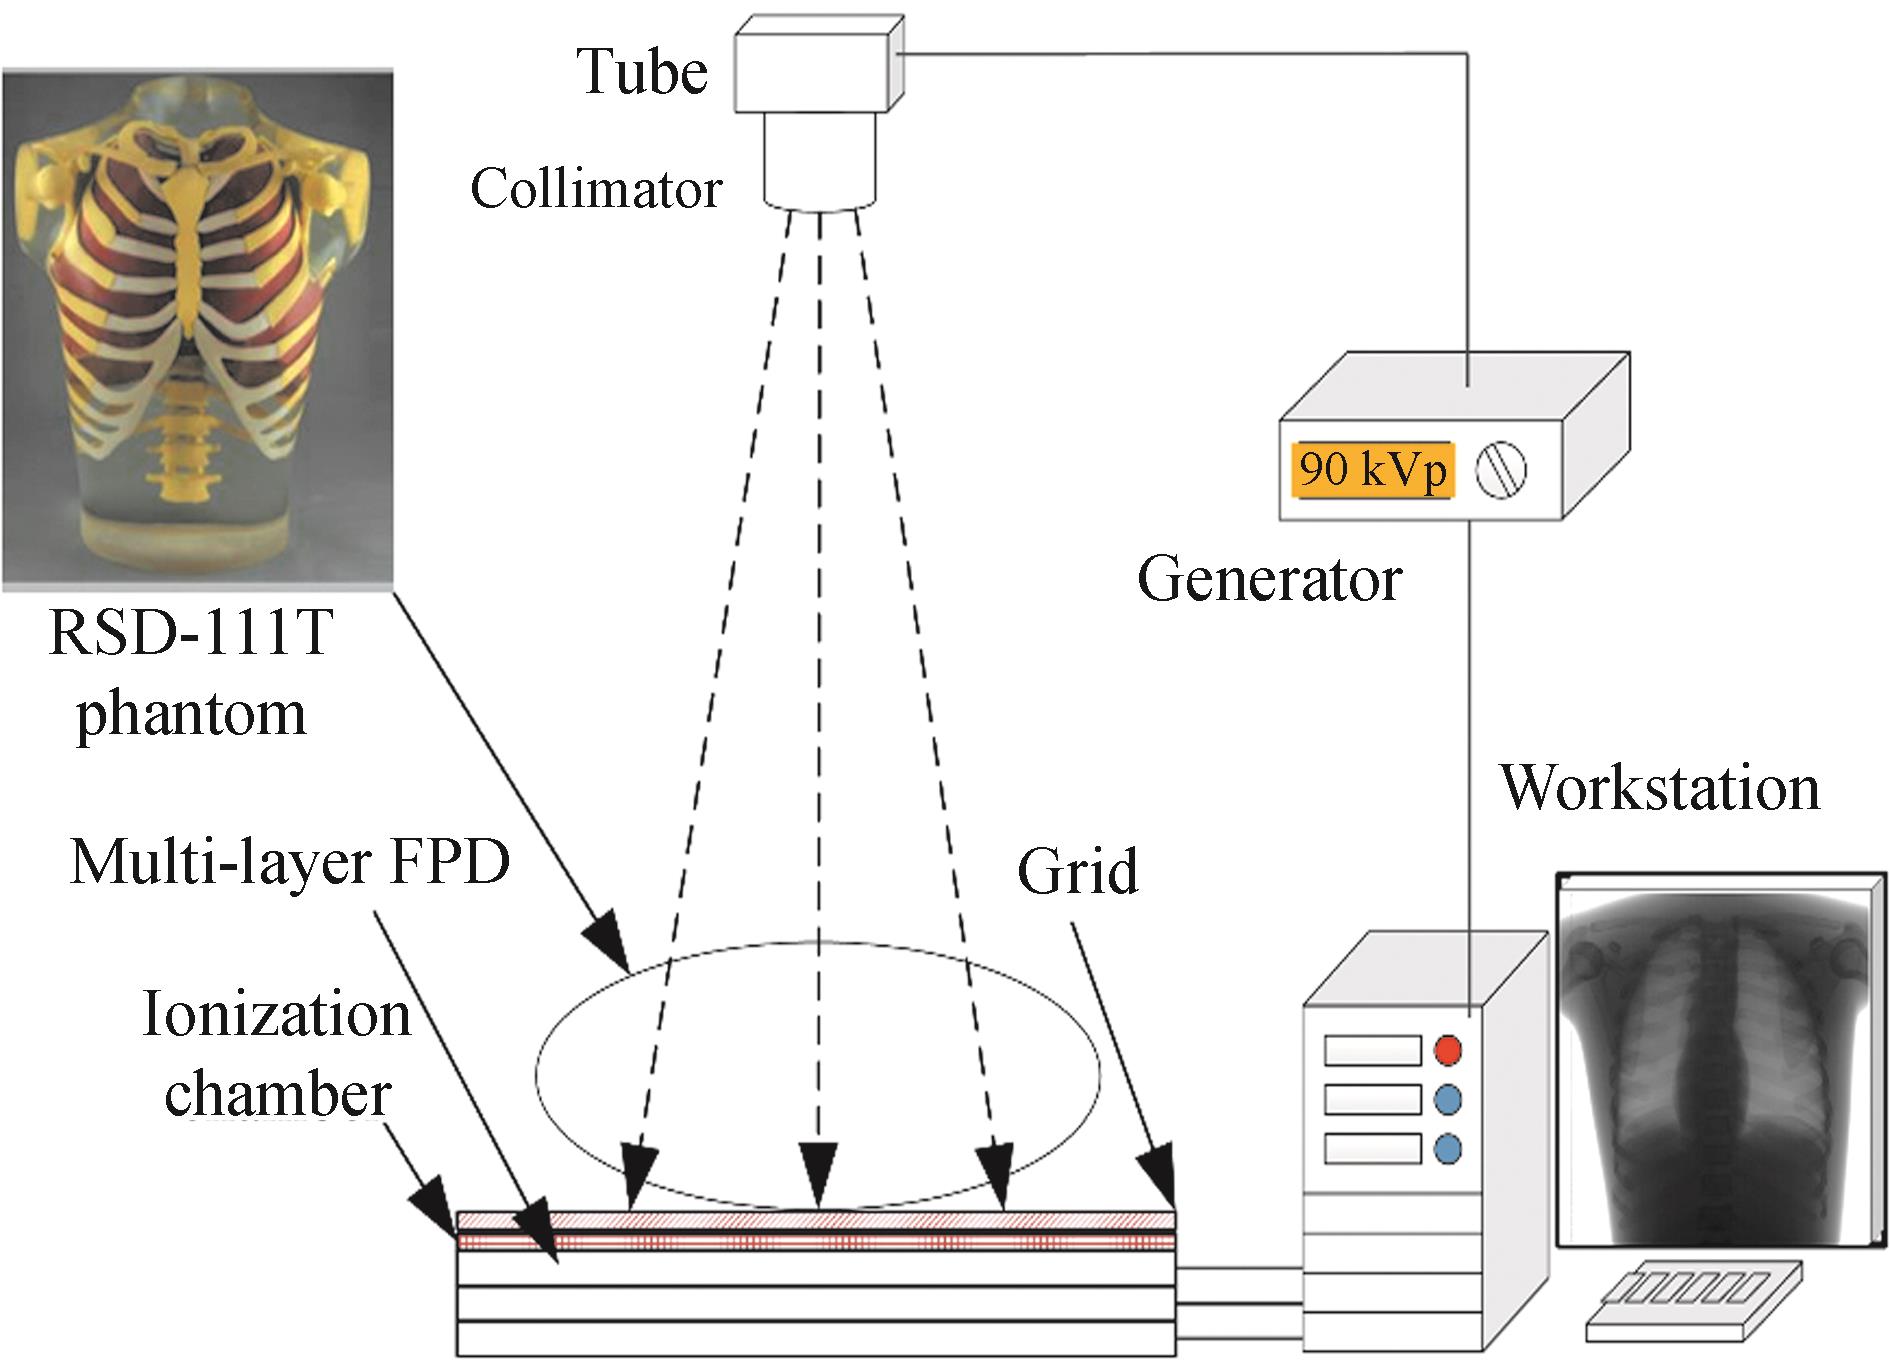 Schematic diagram of multi-layer FPD imaging system